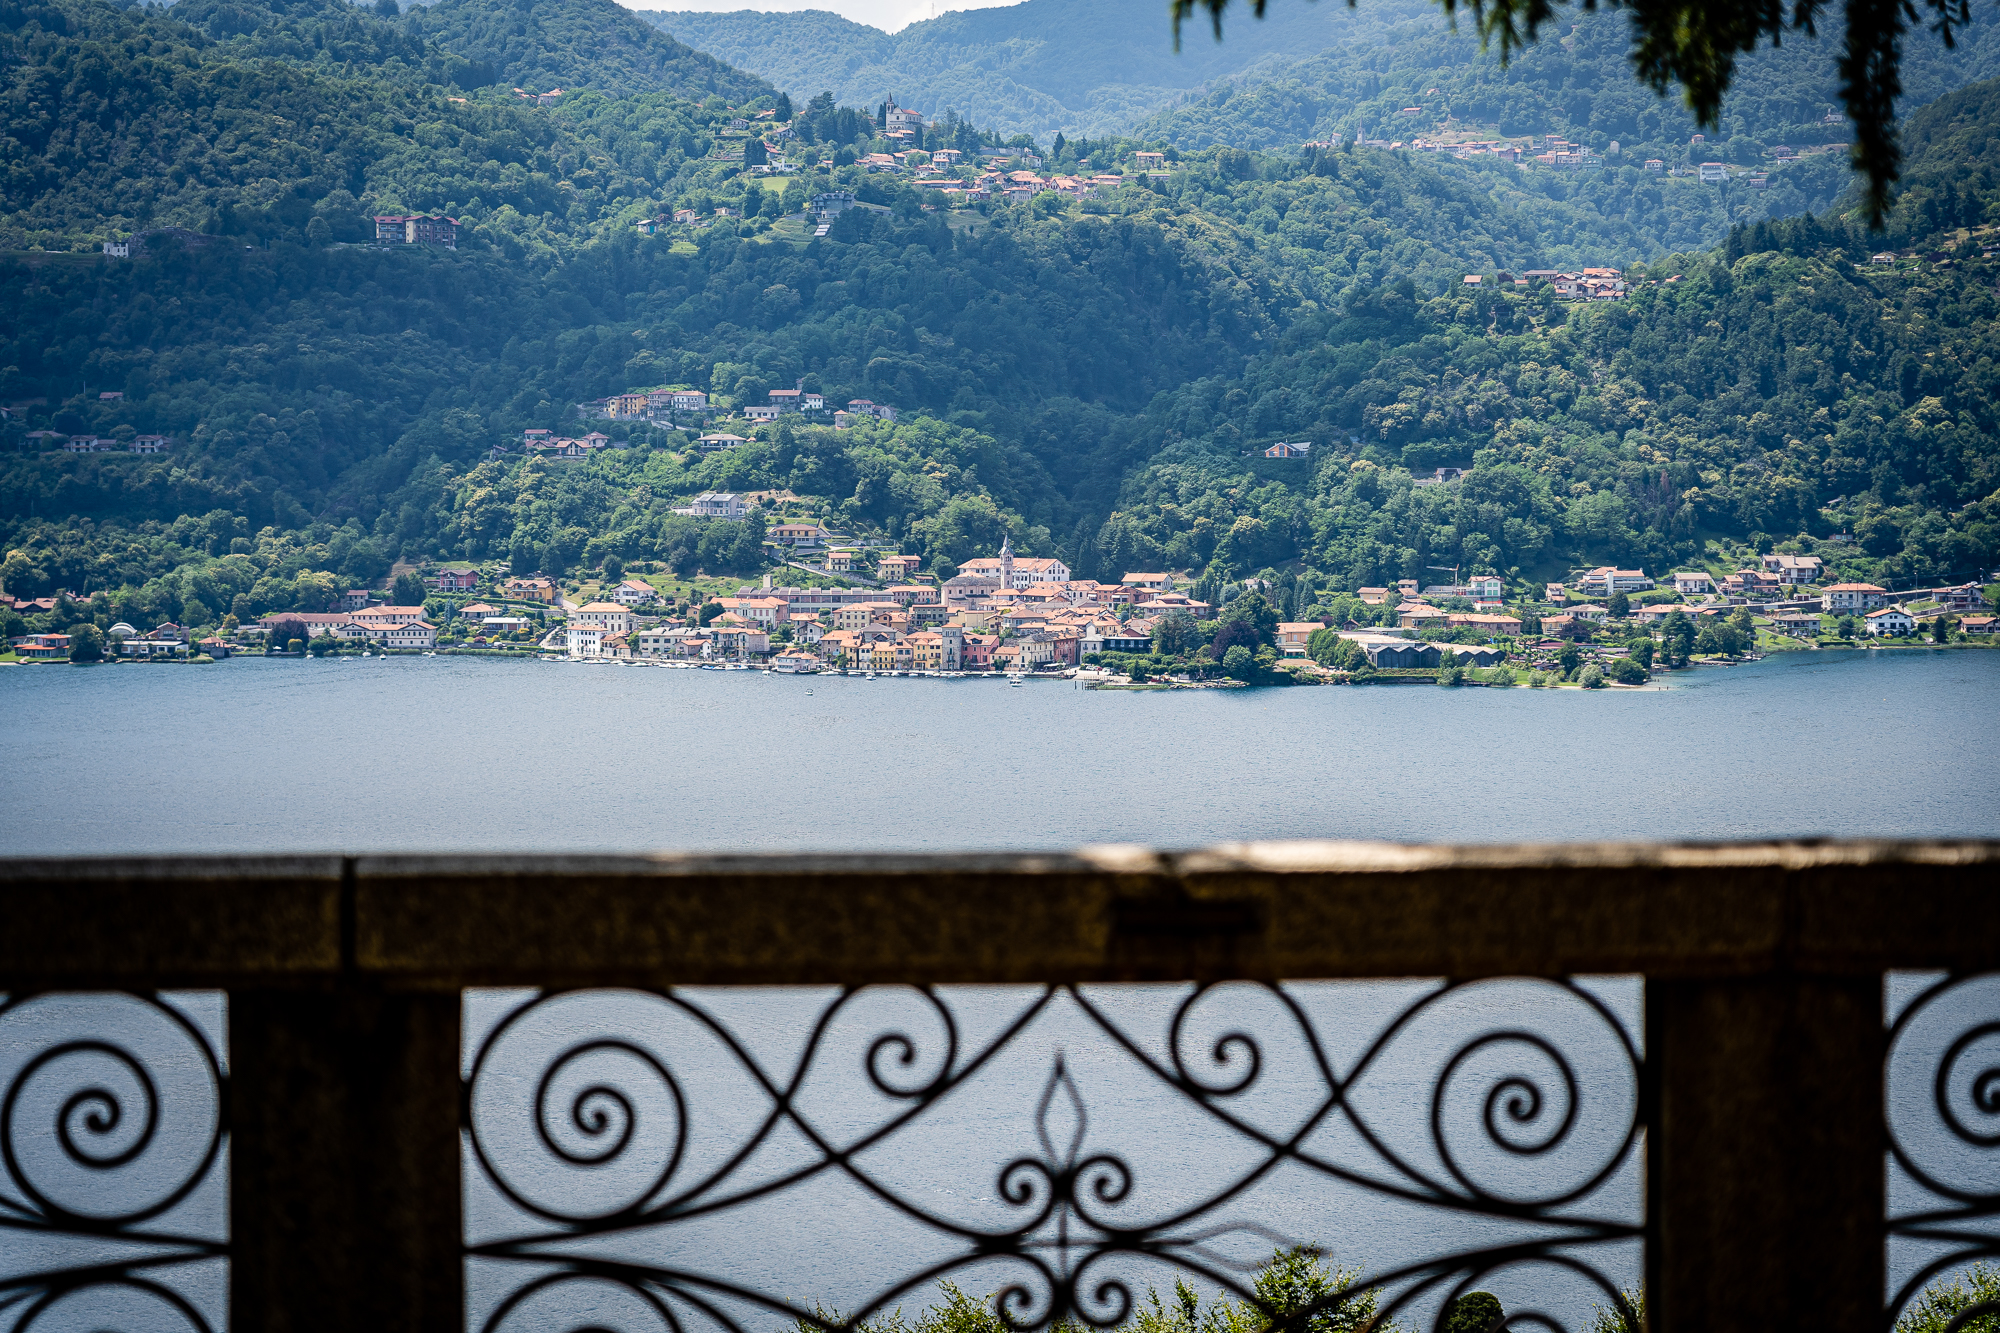 Lago d'Orta as seen from San Nicolao hill